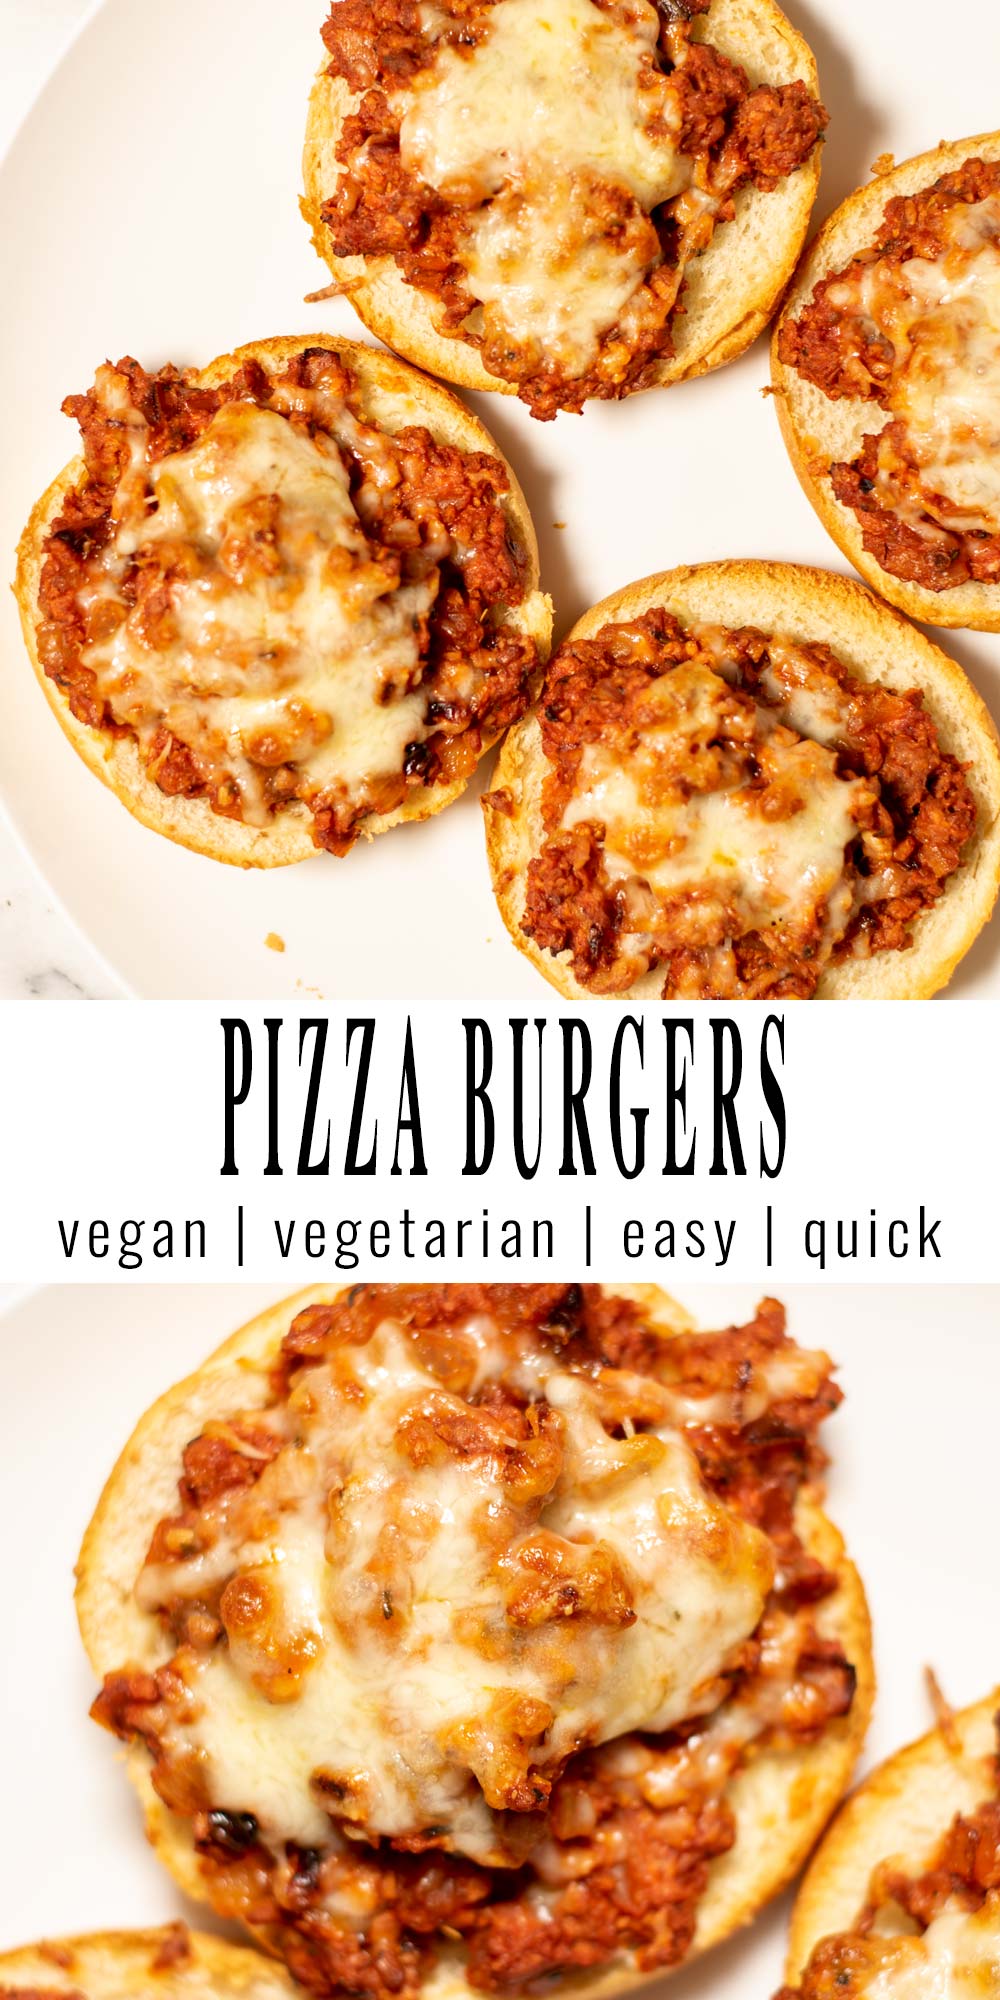 Collage of two pictures of the Pizza Burgers with recipe title text.